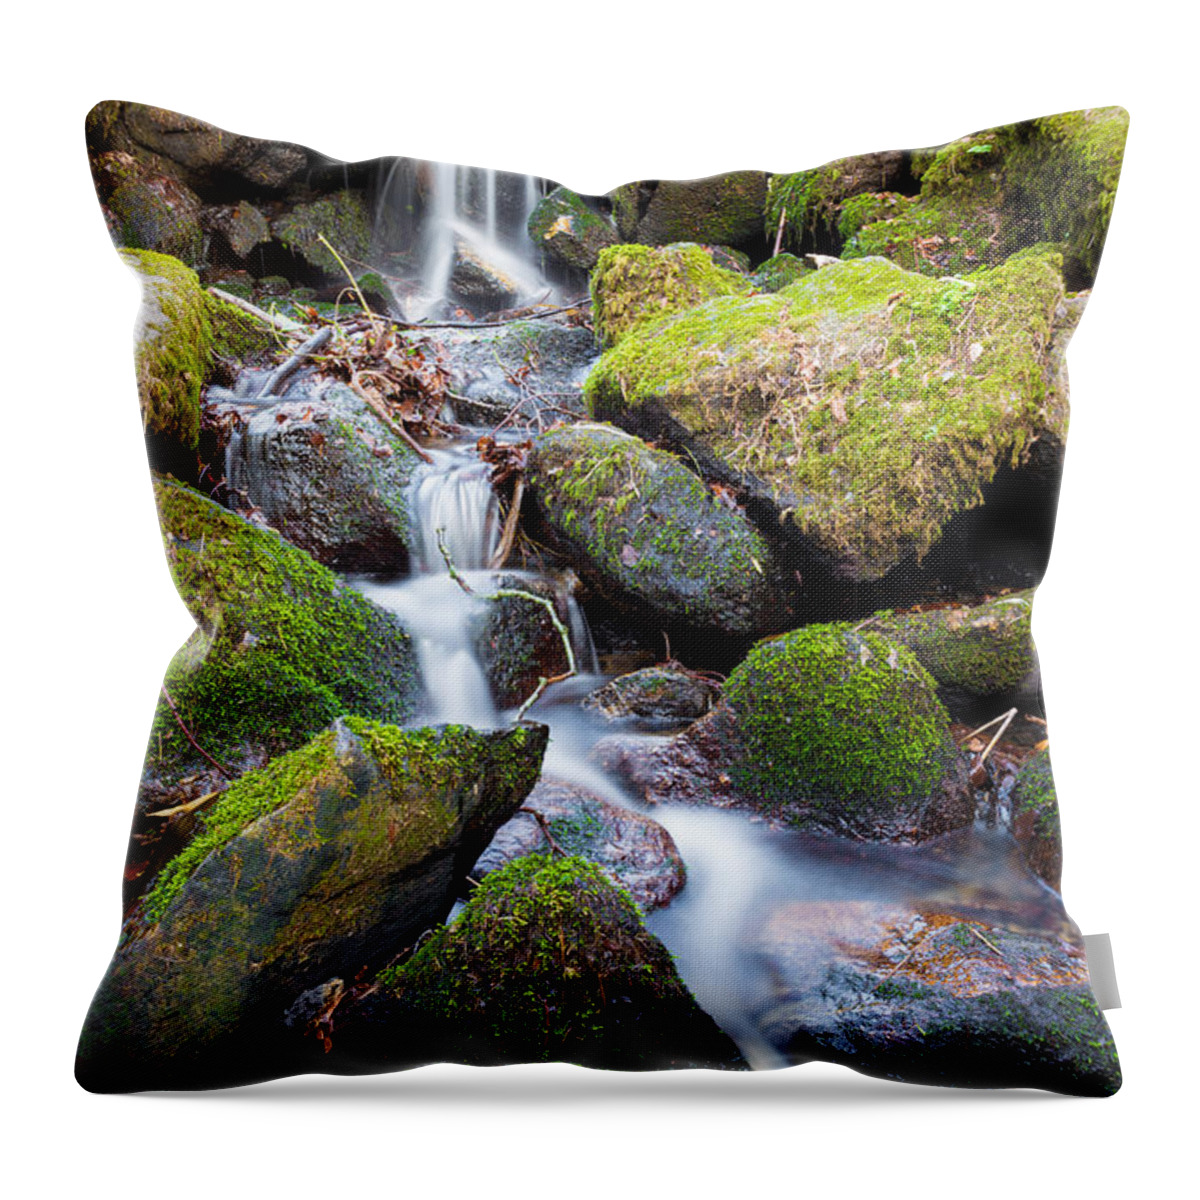 Dublin Throw Pillow featuring the photograph Little Waterfall in Marlay Park by Semmick Photo